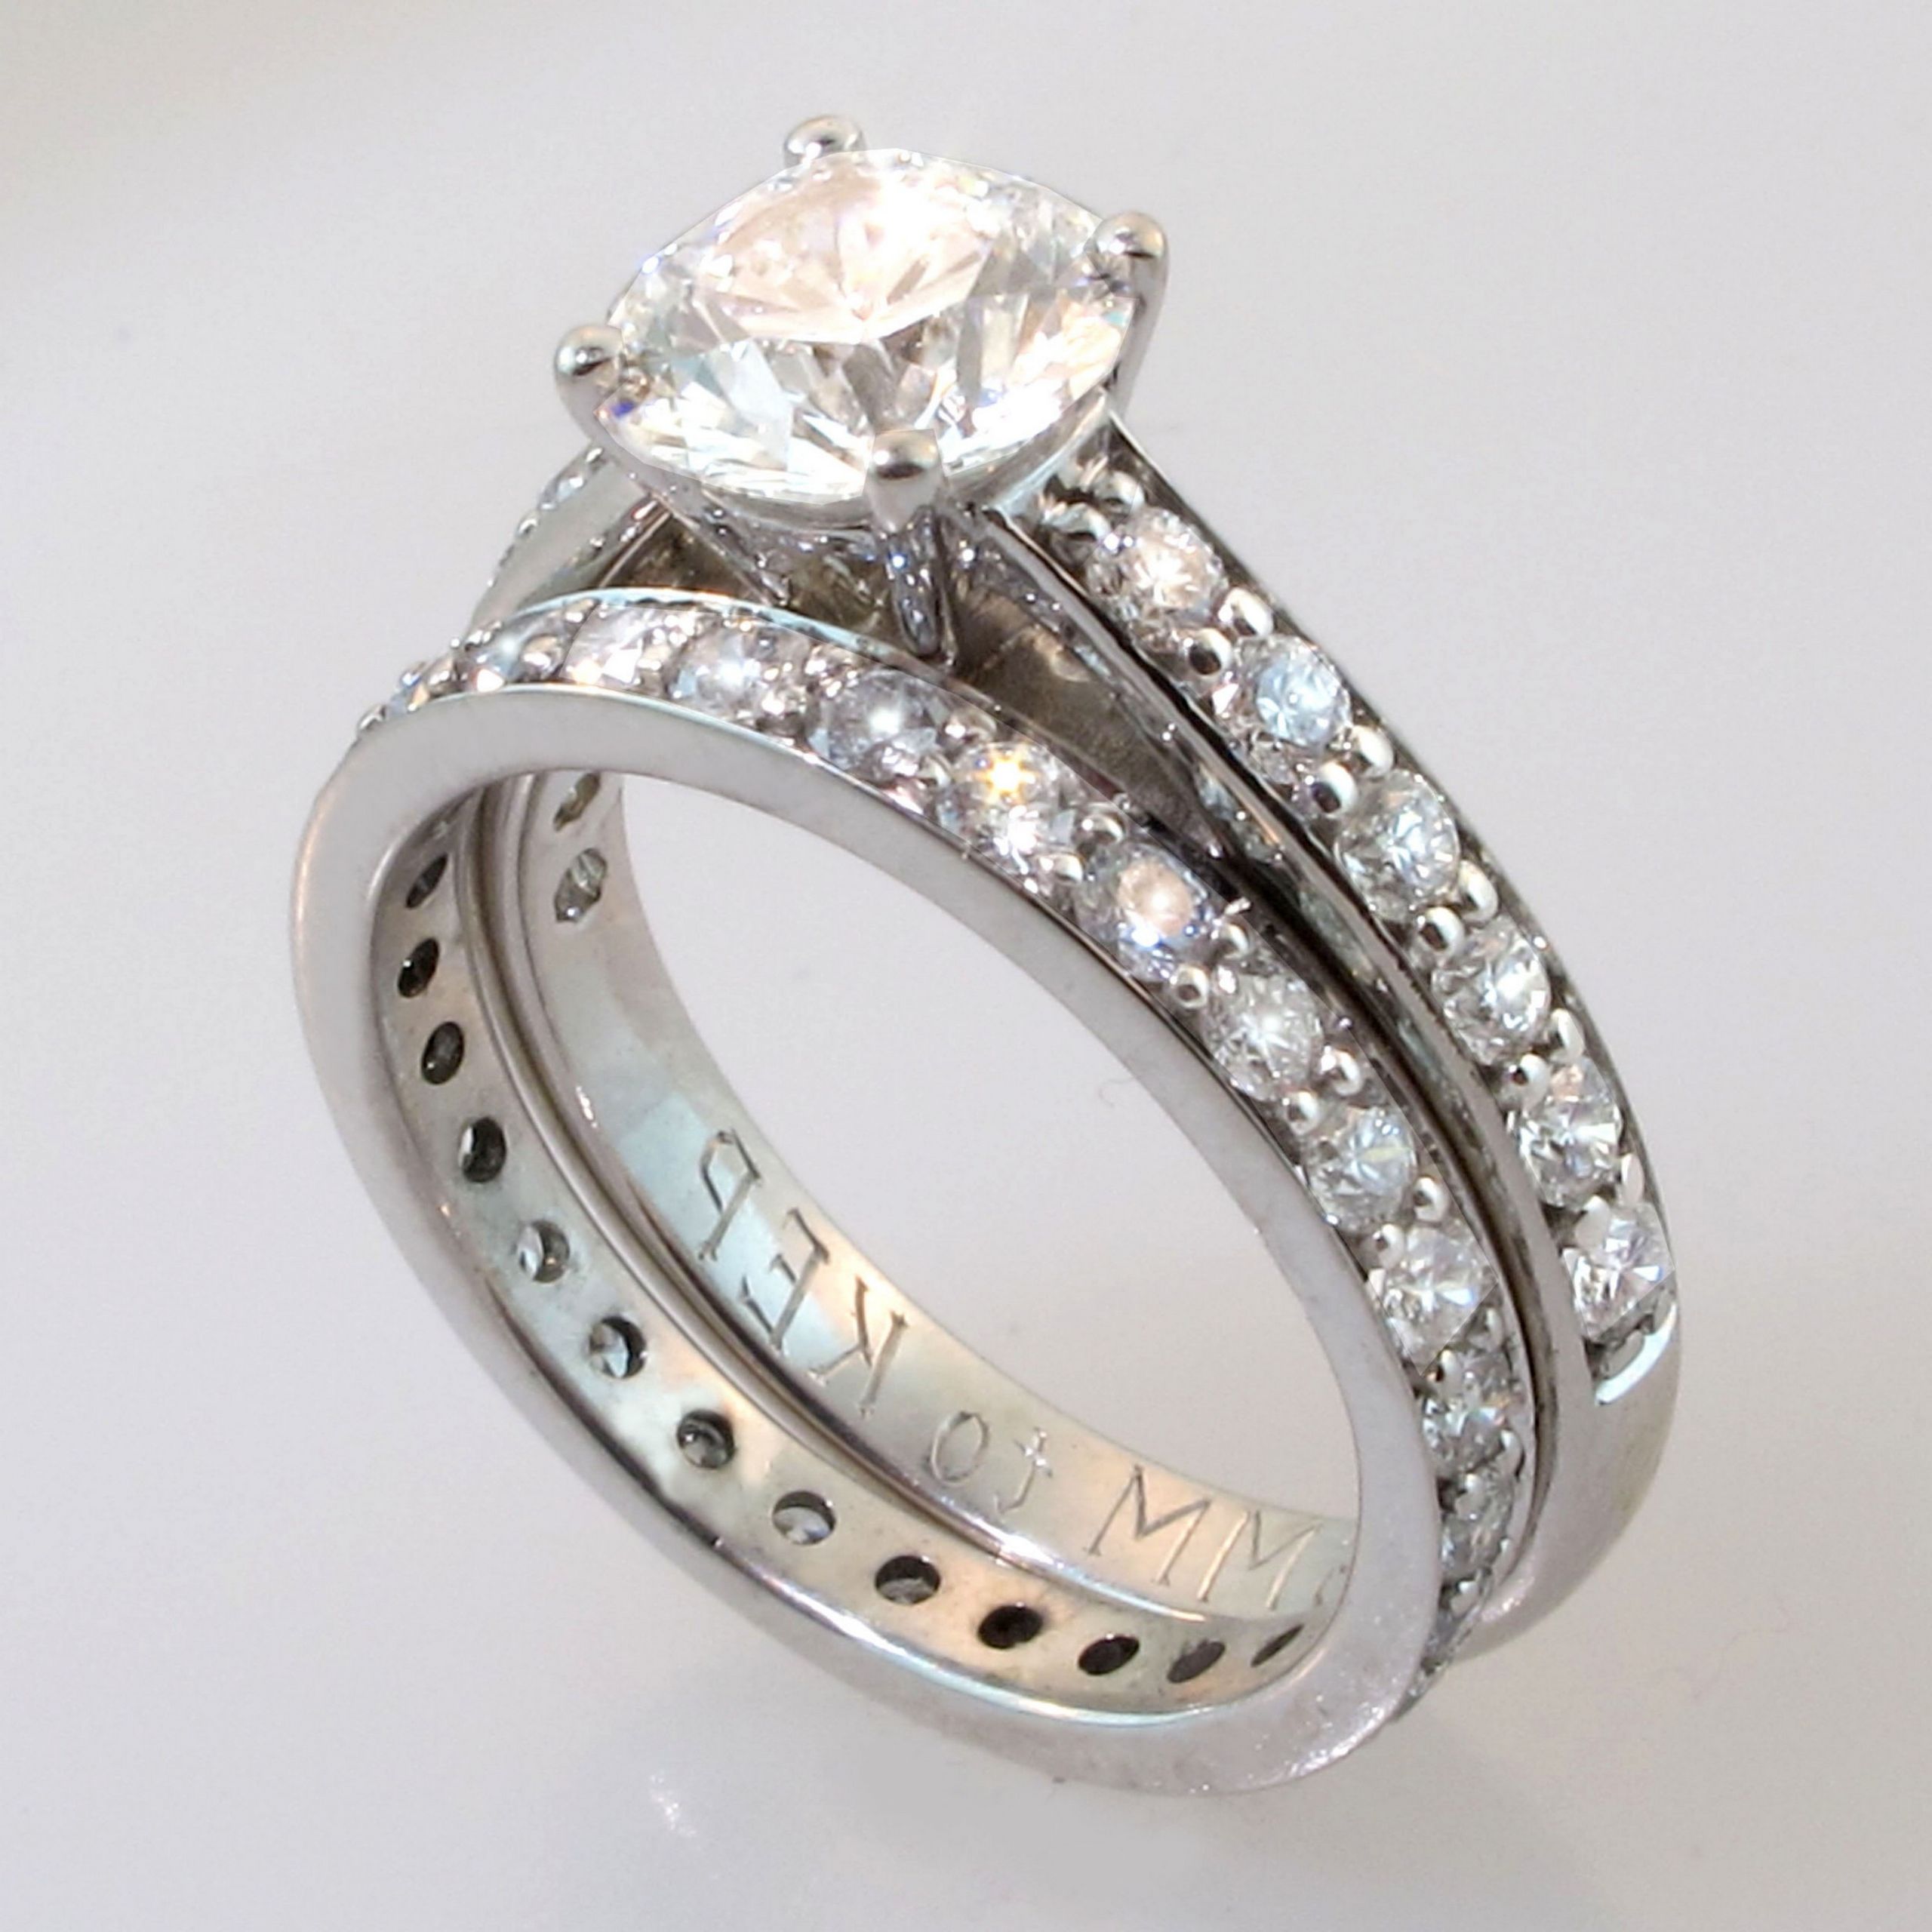 Wedding Ring Sets Cheap
 Why Should Make Wedding Ring Sets For Women and Also Men